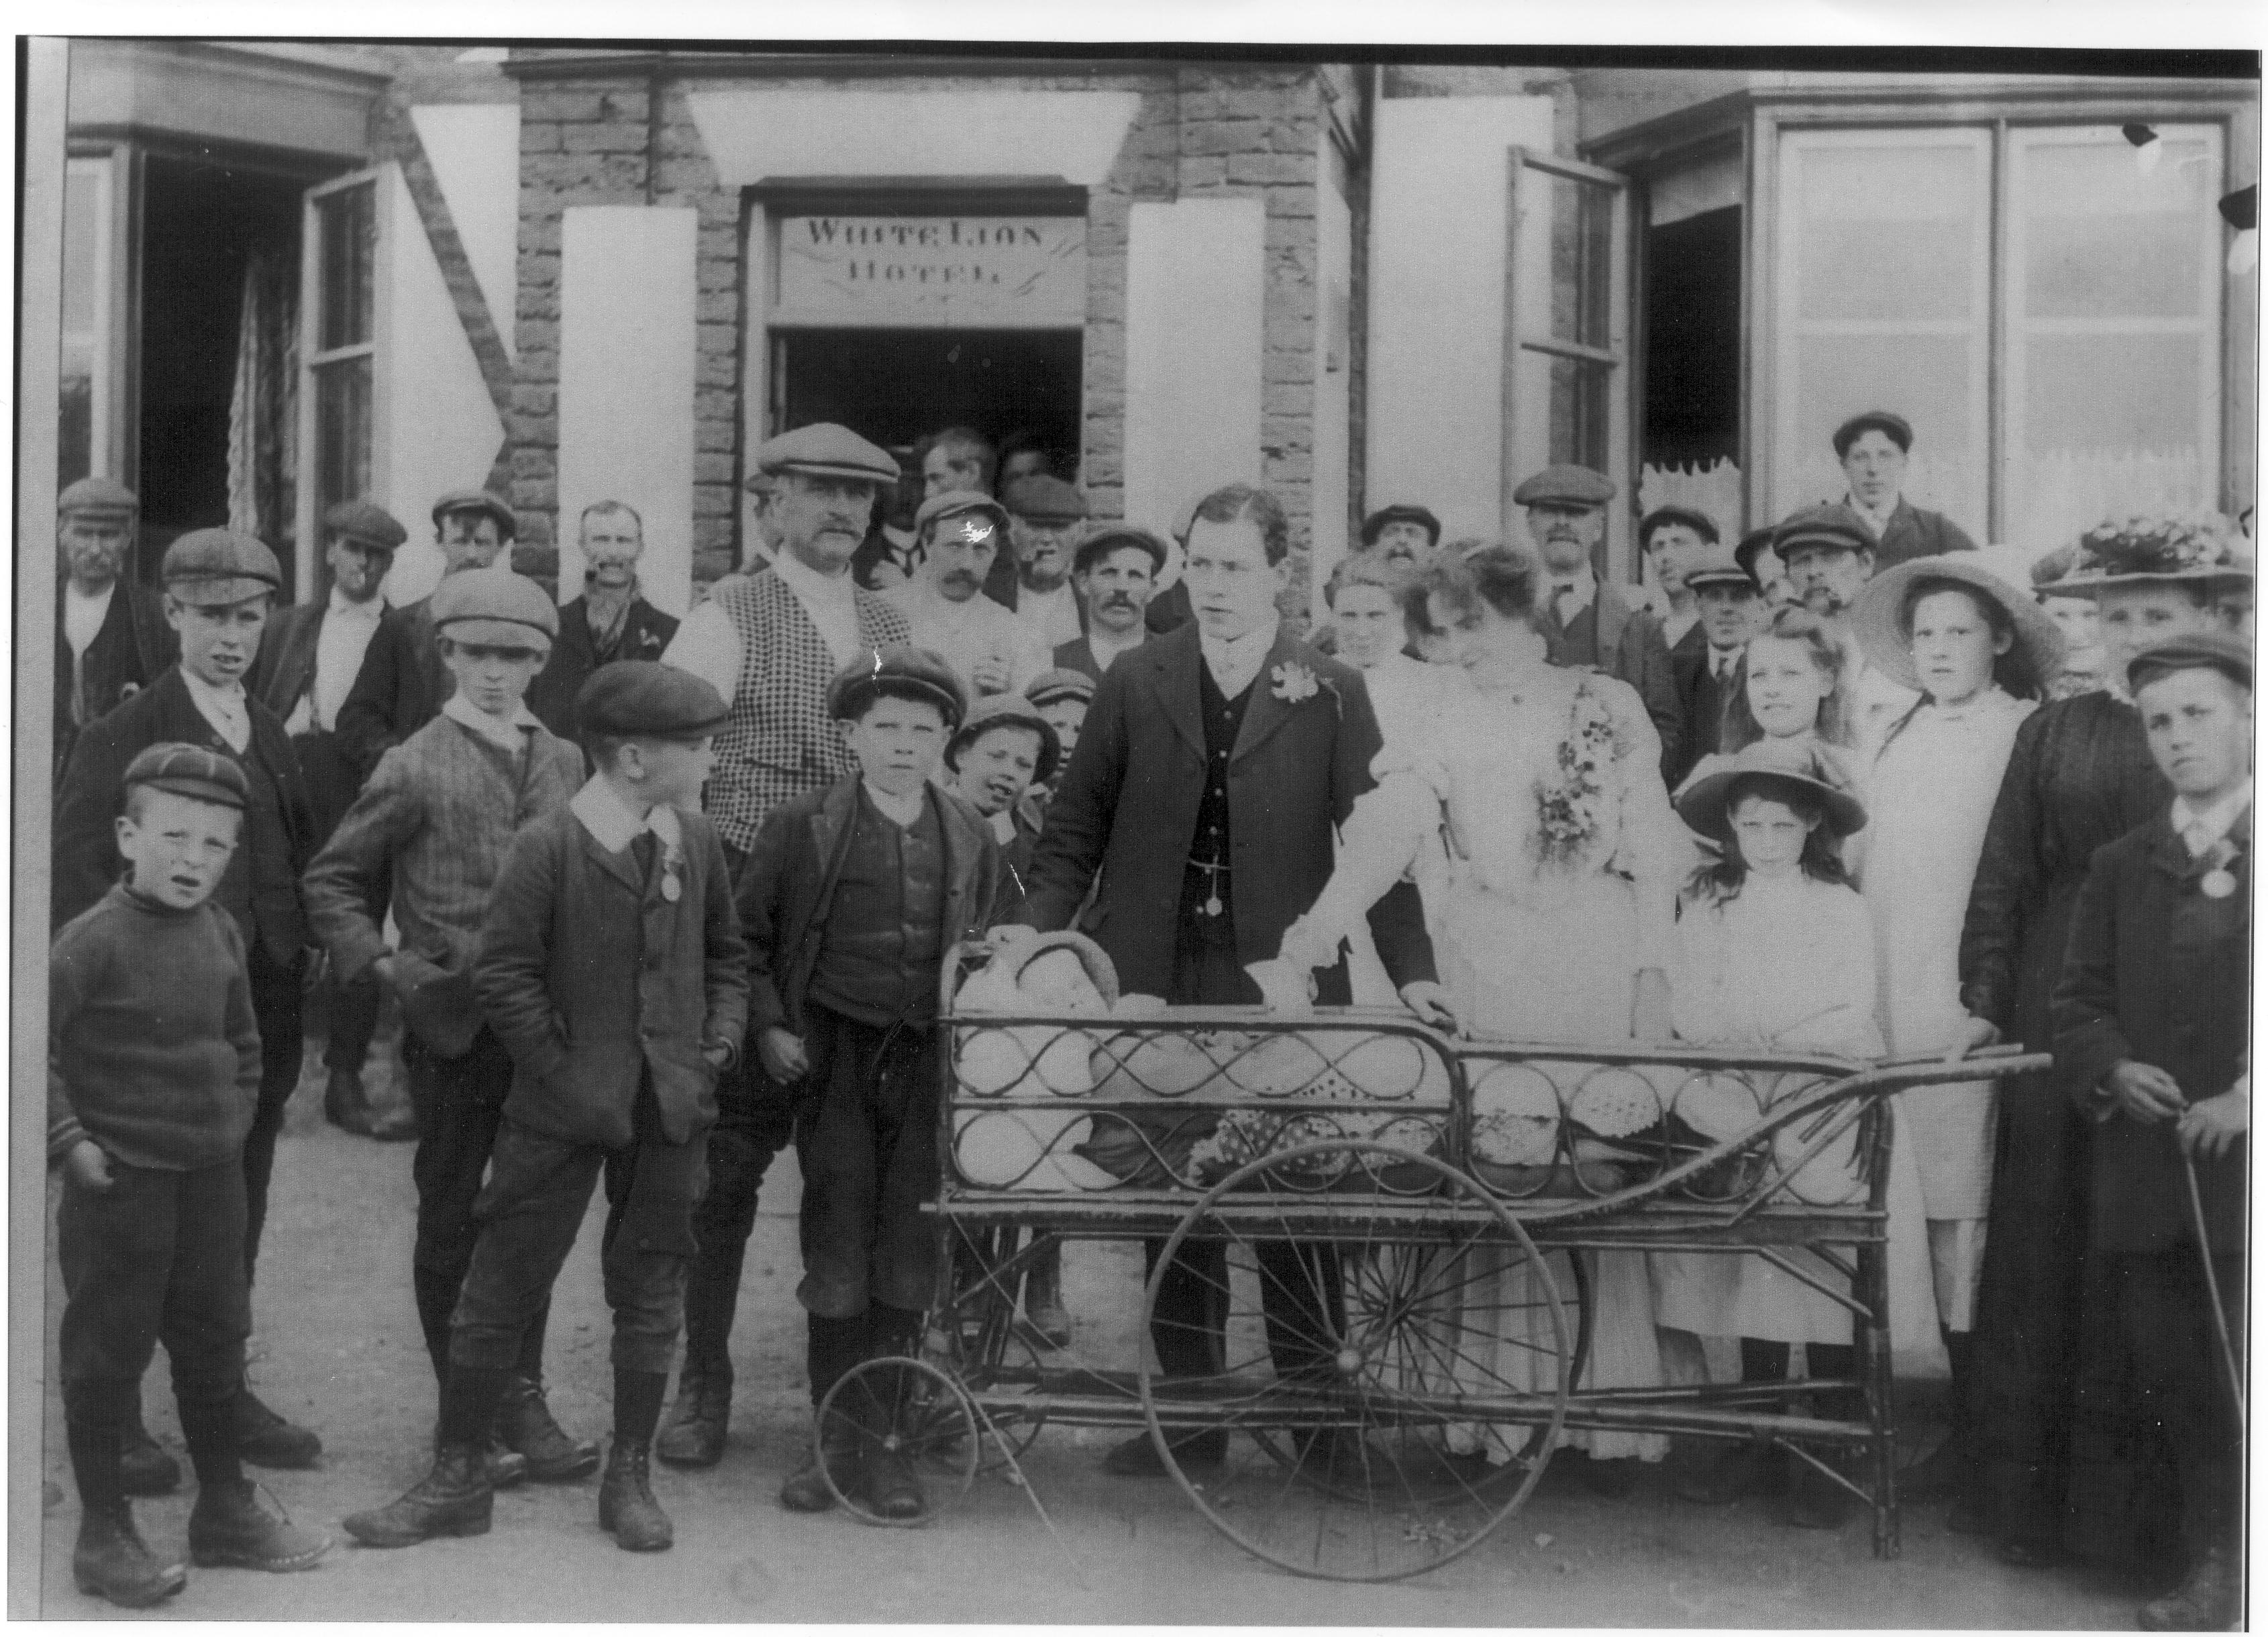 Photograph of a wedding celebration in 1905 at the White Lion, Hankelow.